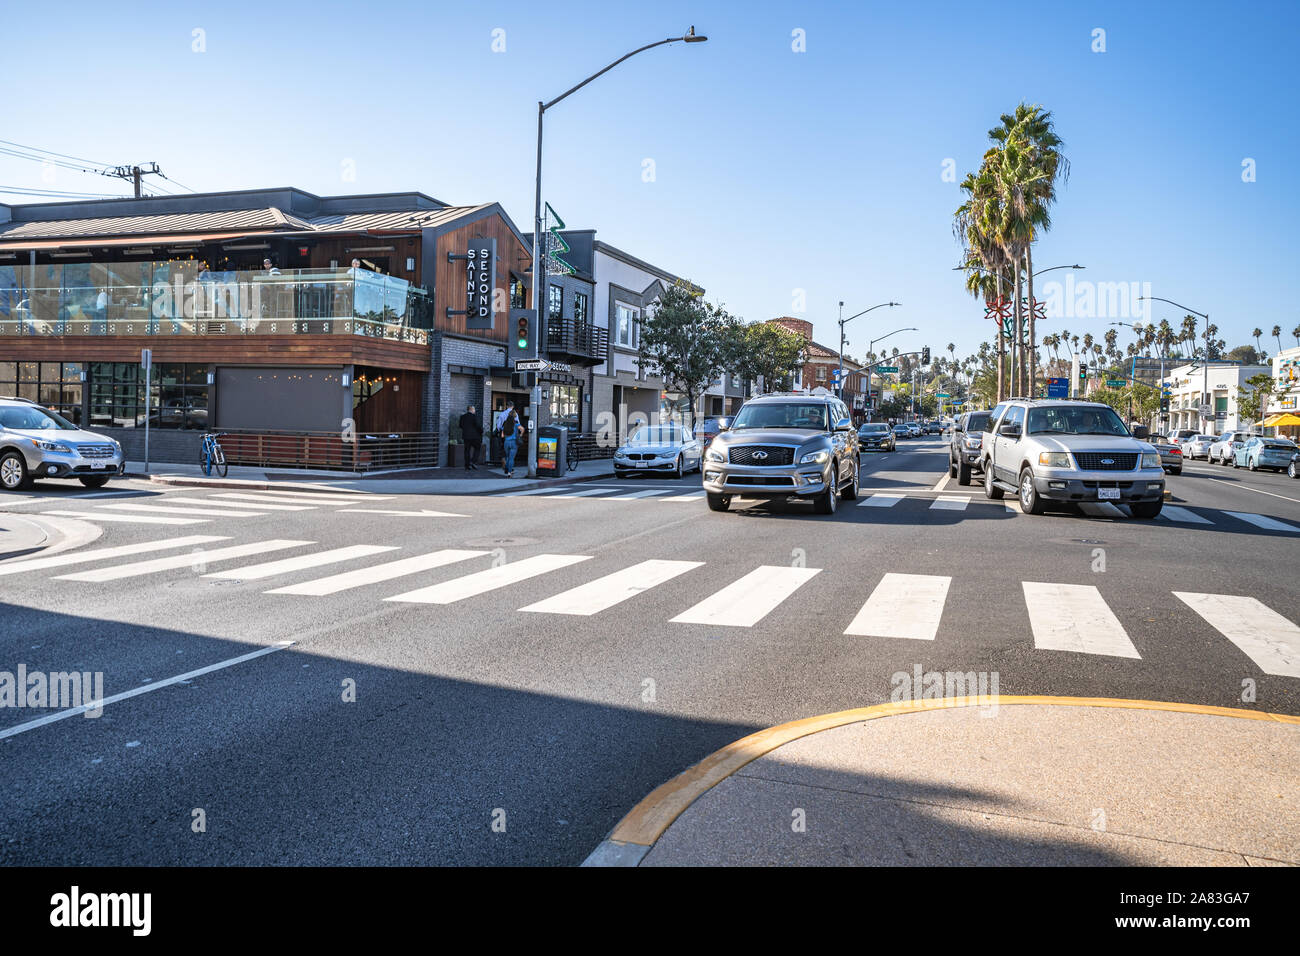 Second Street in Long Beach, California with restaurants and shops Stock Photo